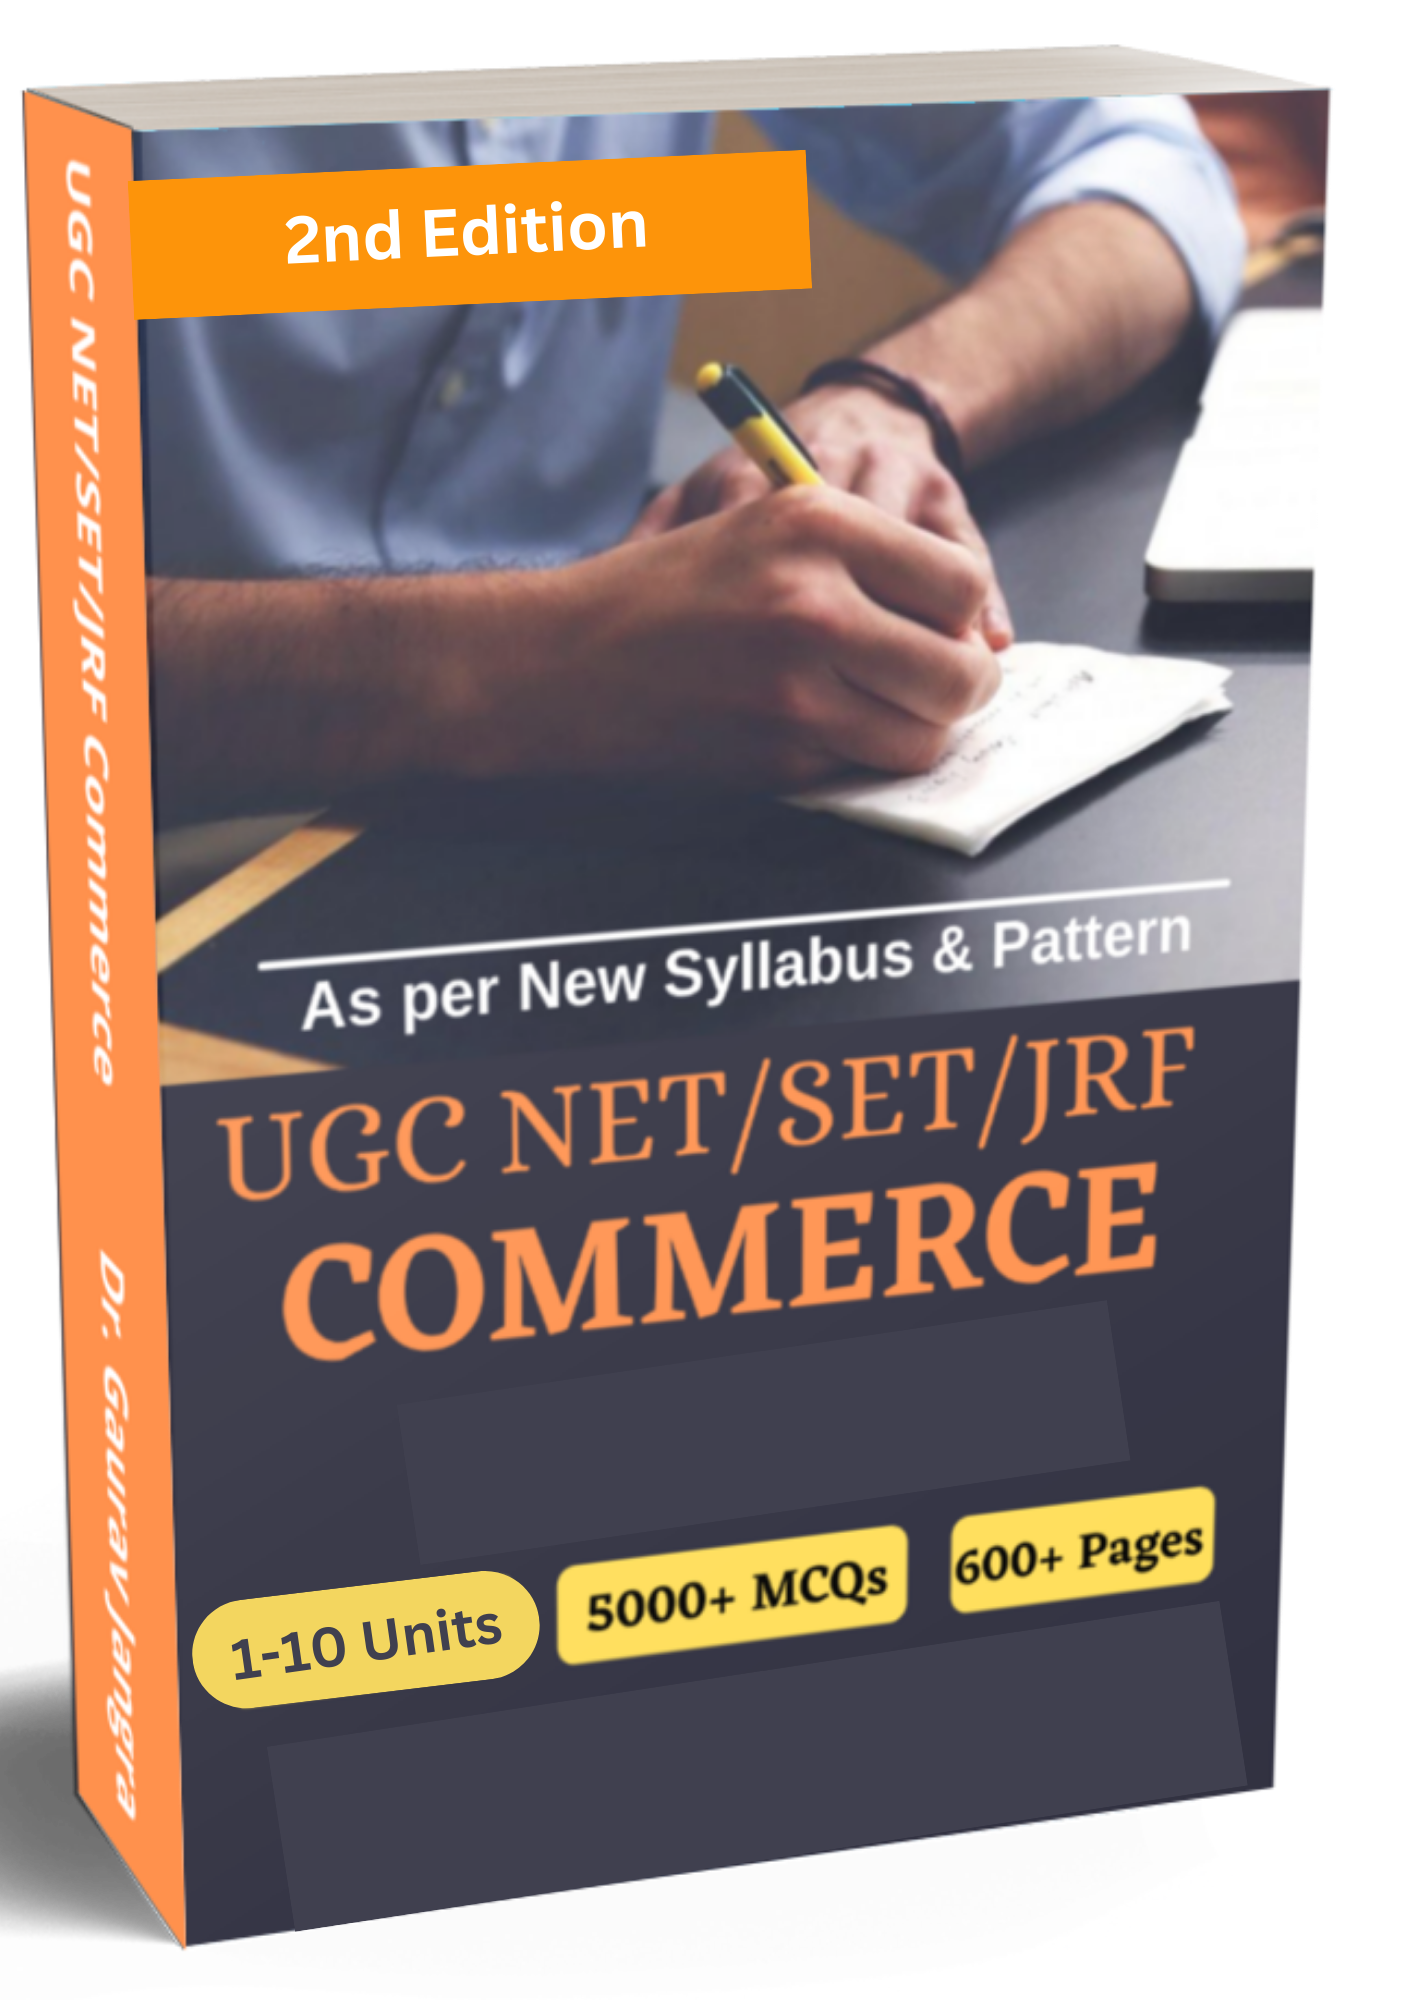 UGC NET Commerce Notes Book by Dr. Gaurav Jangra and Study Material as per new syllabus and pattern are available unit-wise in printed Form. UGC NET Notes for commerce divided into various units and every unit is divided in chapters followed by MCQs.